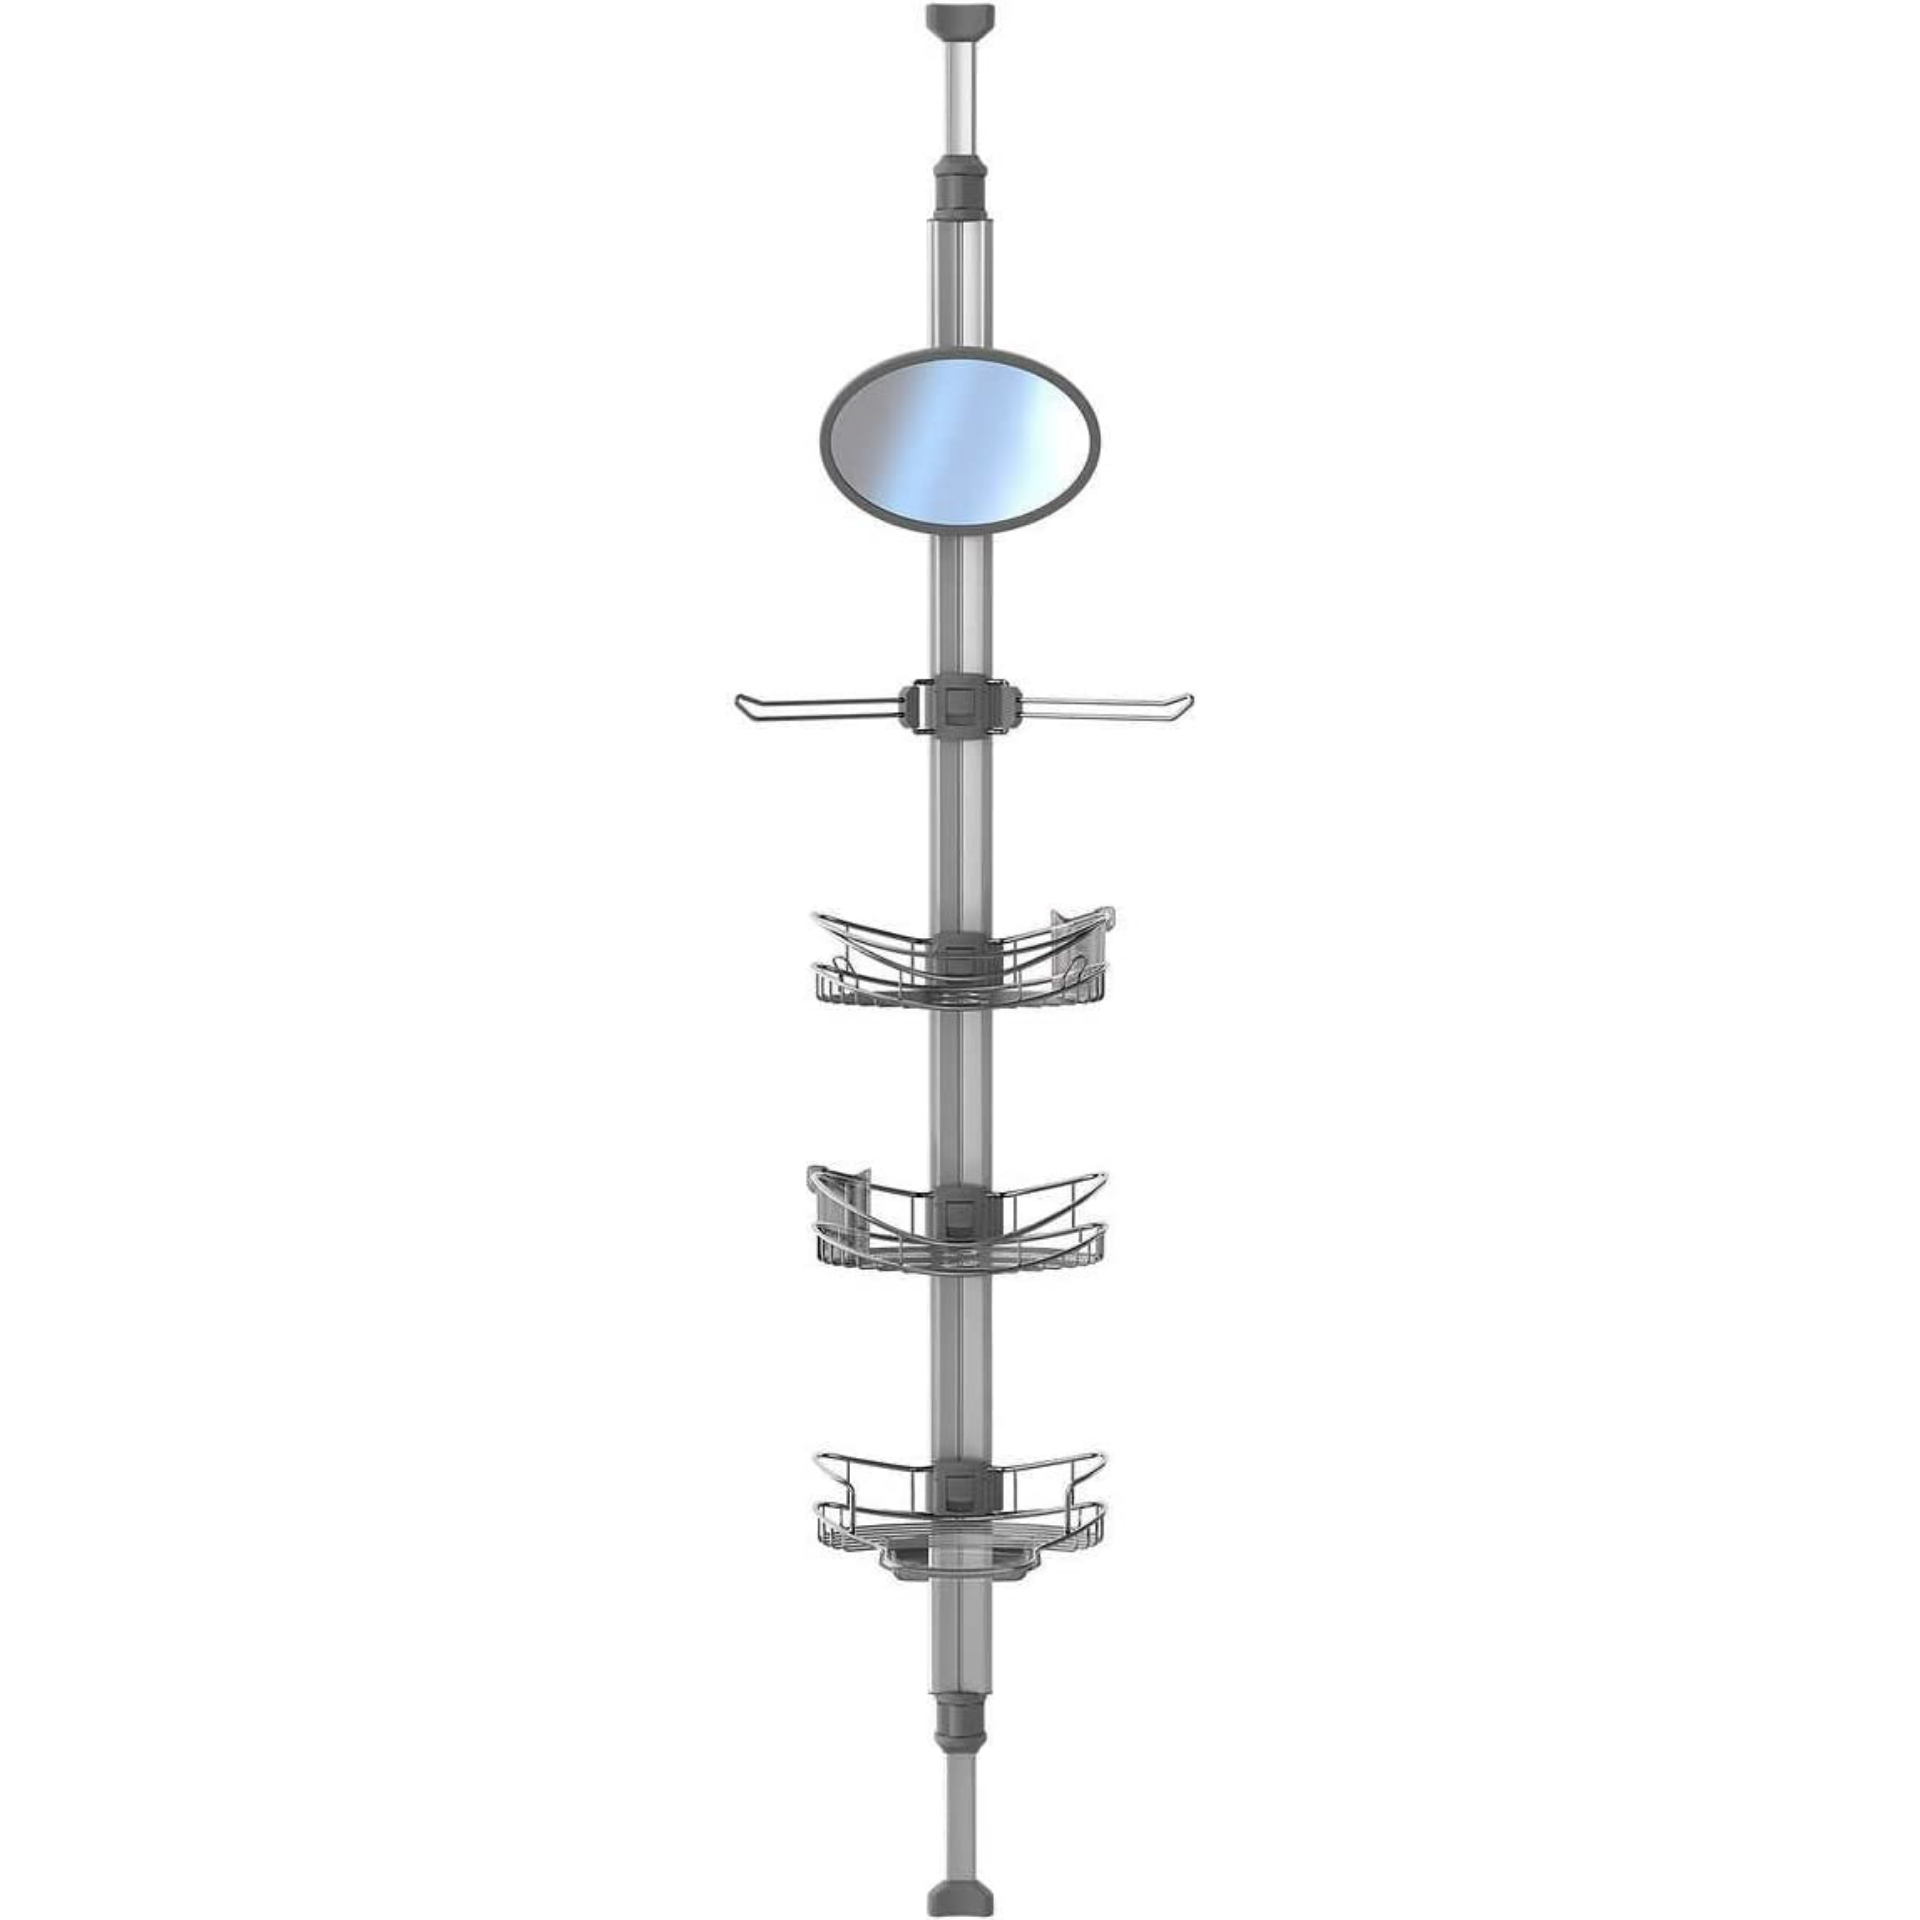 Artika Neptune SC-NEP3-C Extendable Shower Caddy with 1 Mirror and  Adjustable Racks and Shelves, Stainless Steel 99.99 - Quarter Price